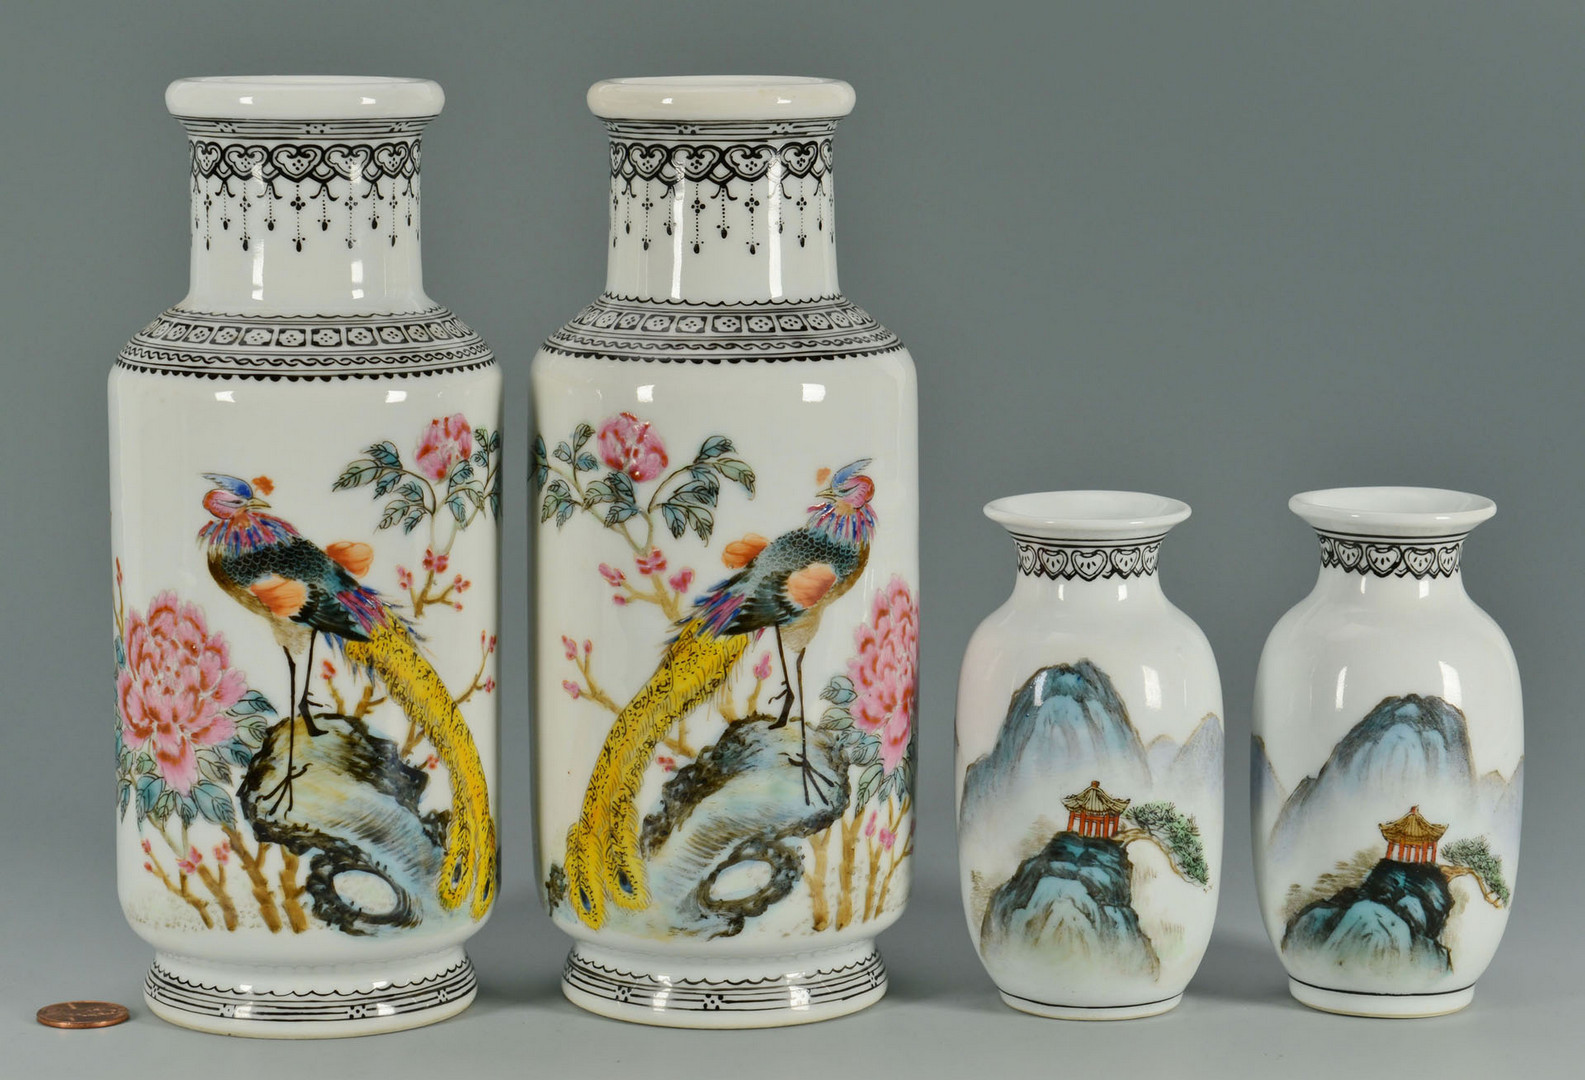 Lot 816: 5 Asian Porcelain and Decorative Items